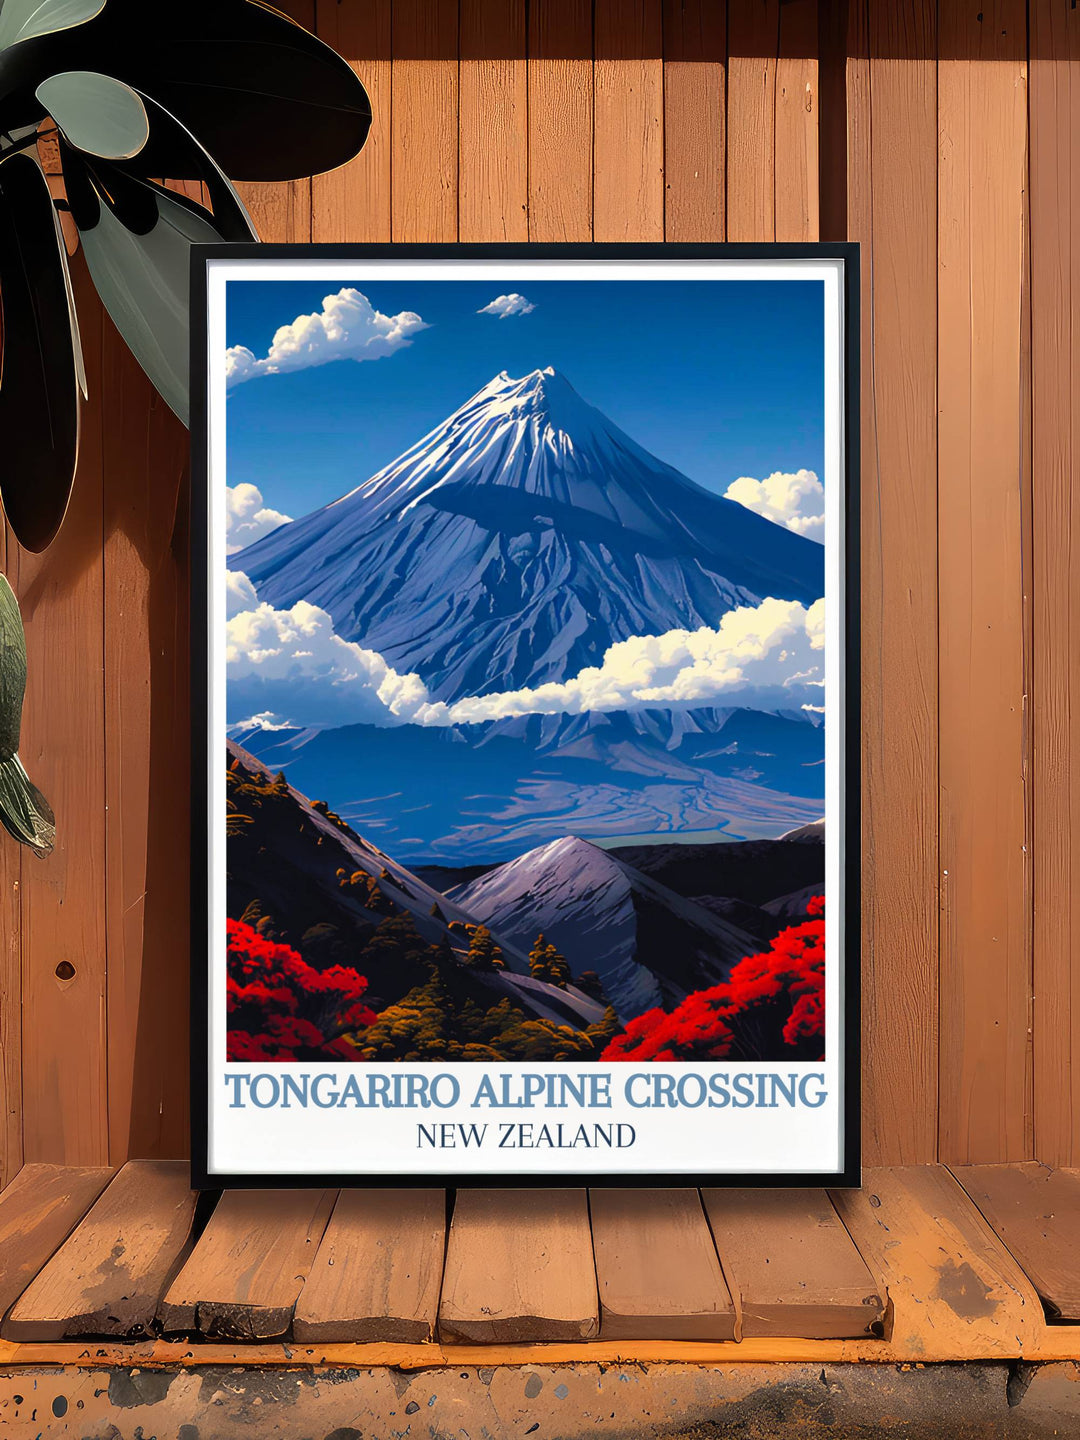 Tongariro Alpine Crossing gallery wall art designed to transport you to the heart of New Zealands natural wonder, showcasing the trails breathtaking views and rugged beauty.